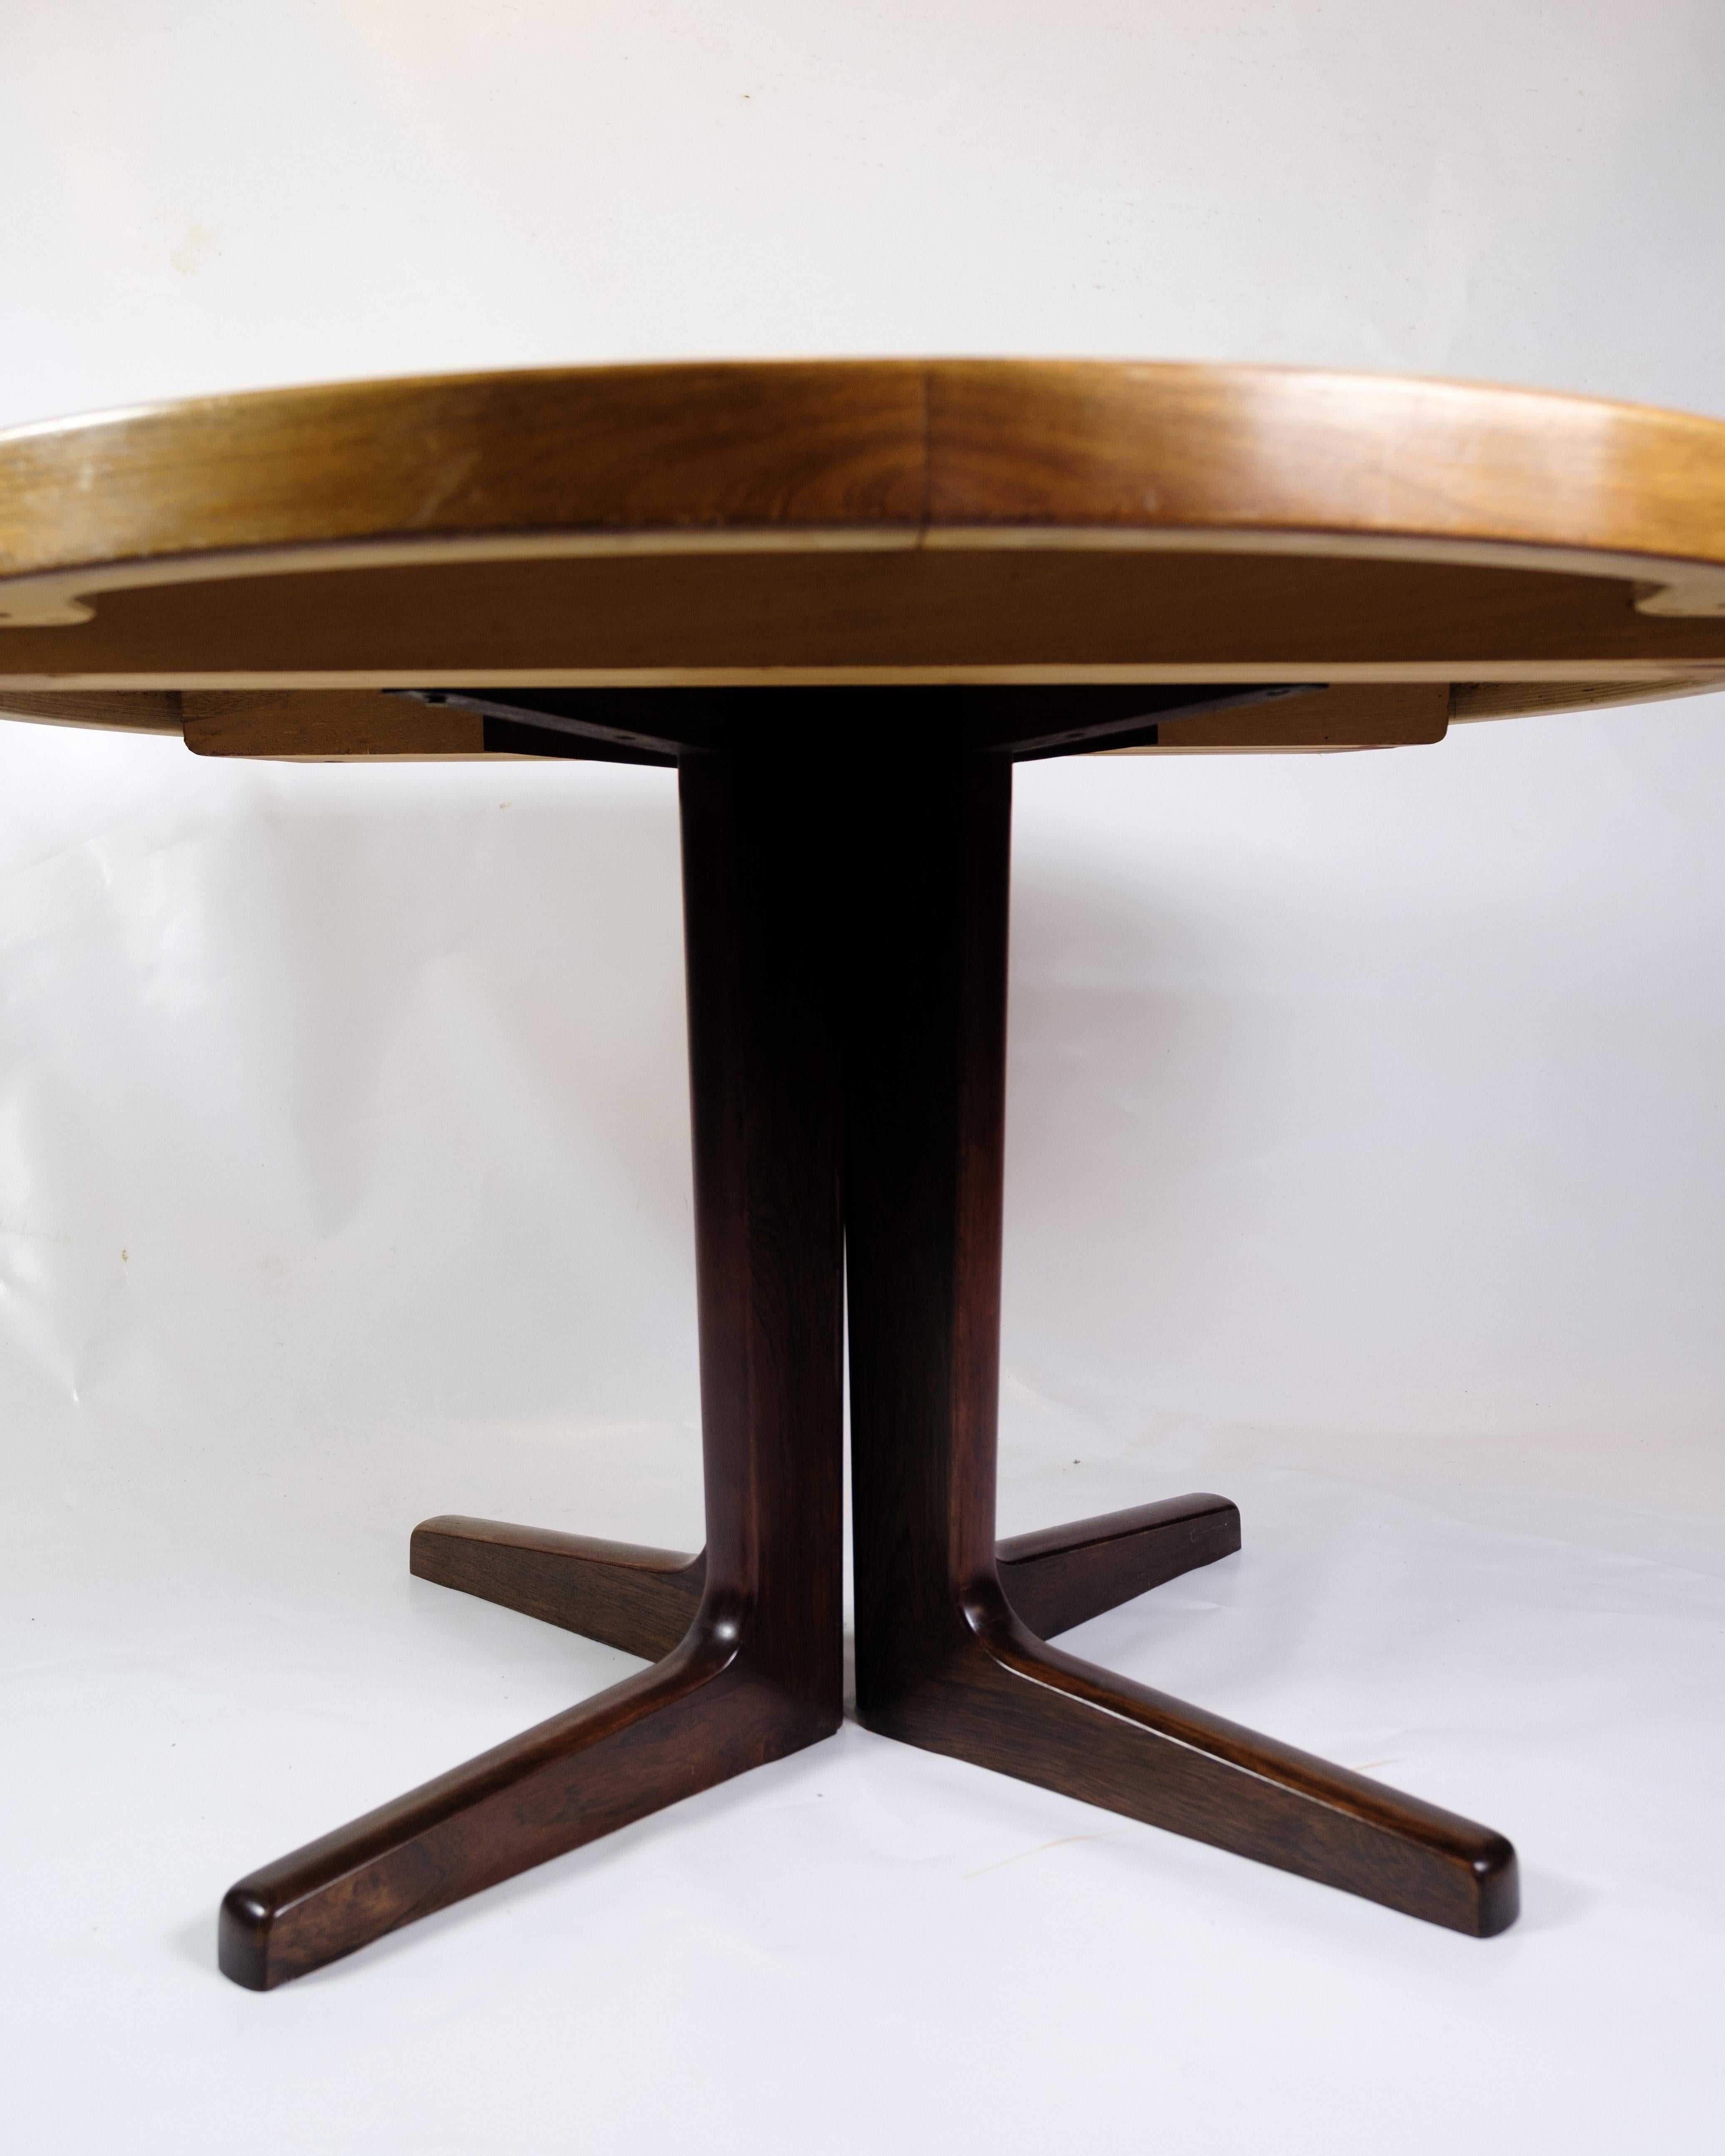 Danish Round Dining Room Table Made In Rosewood By Skovby Møbelfabrik From 1960s For Sale